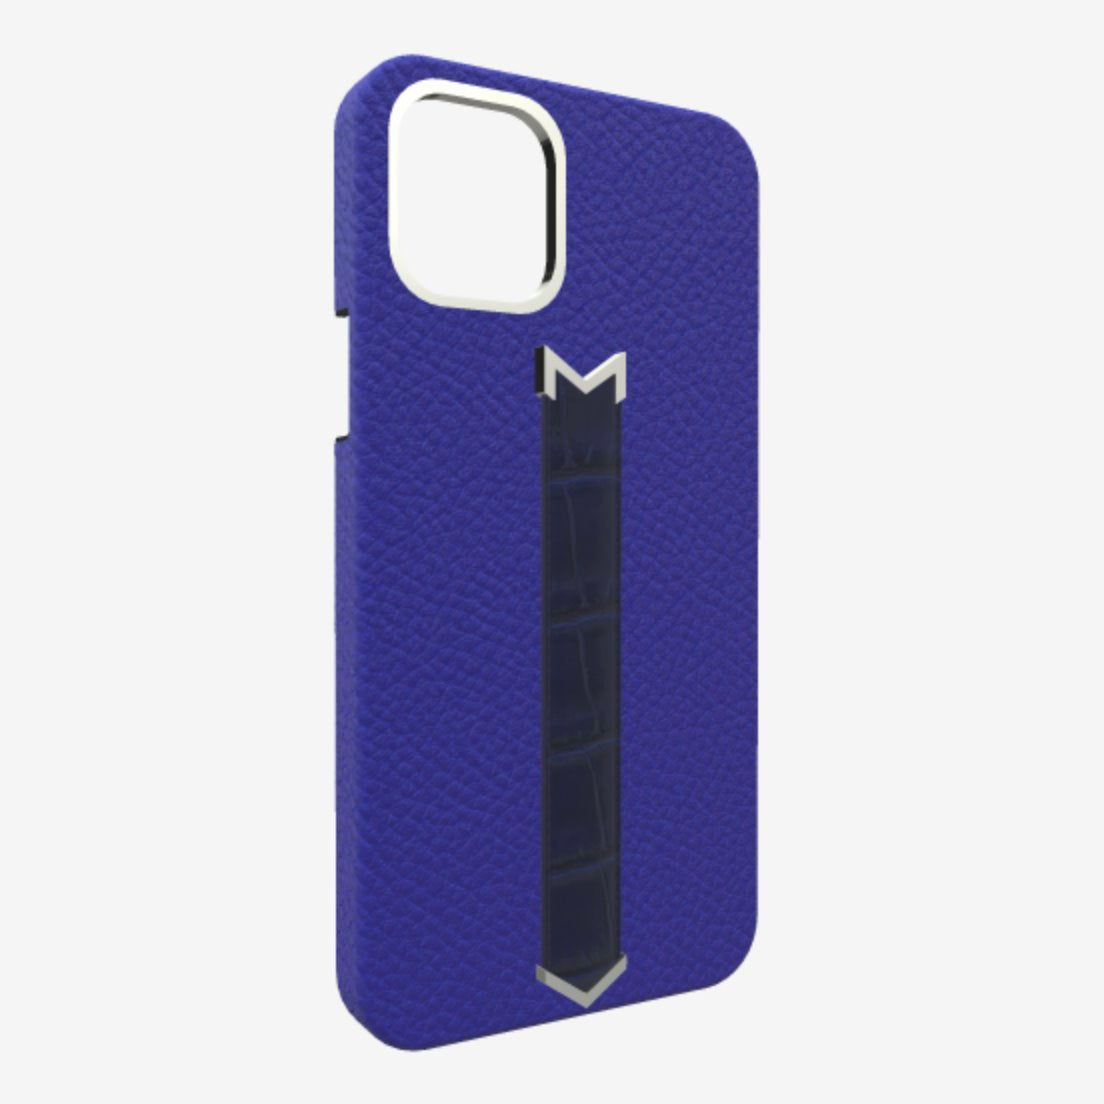 Silver Finger Strap Case for iPhone 13 in Genuine Calfskin and Alligator Electric-Blue Navy-Blue 